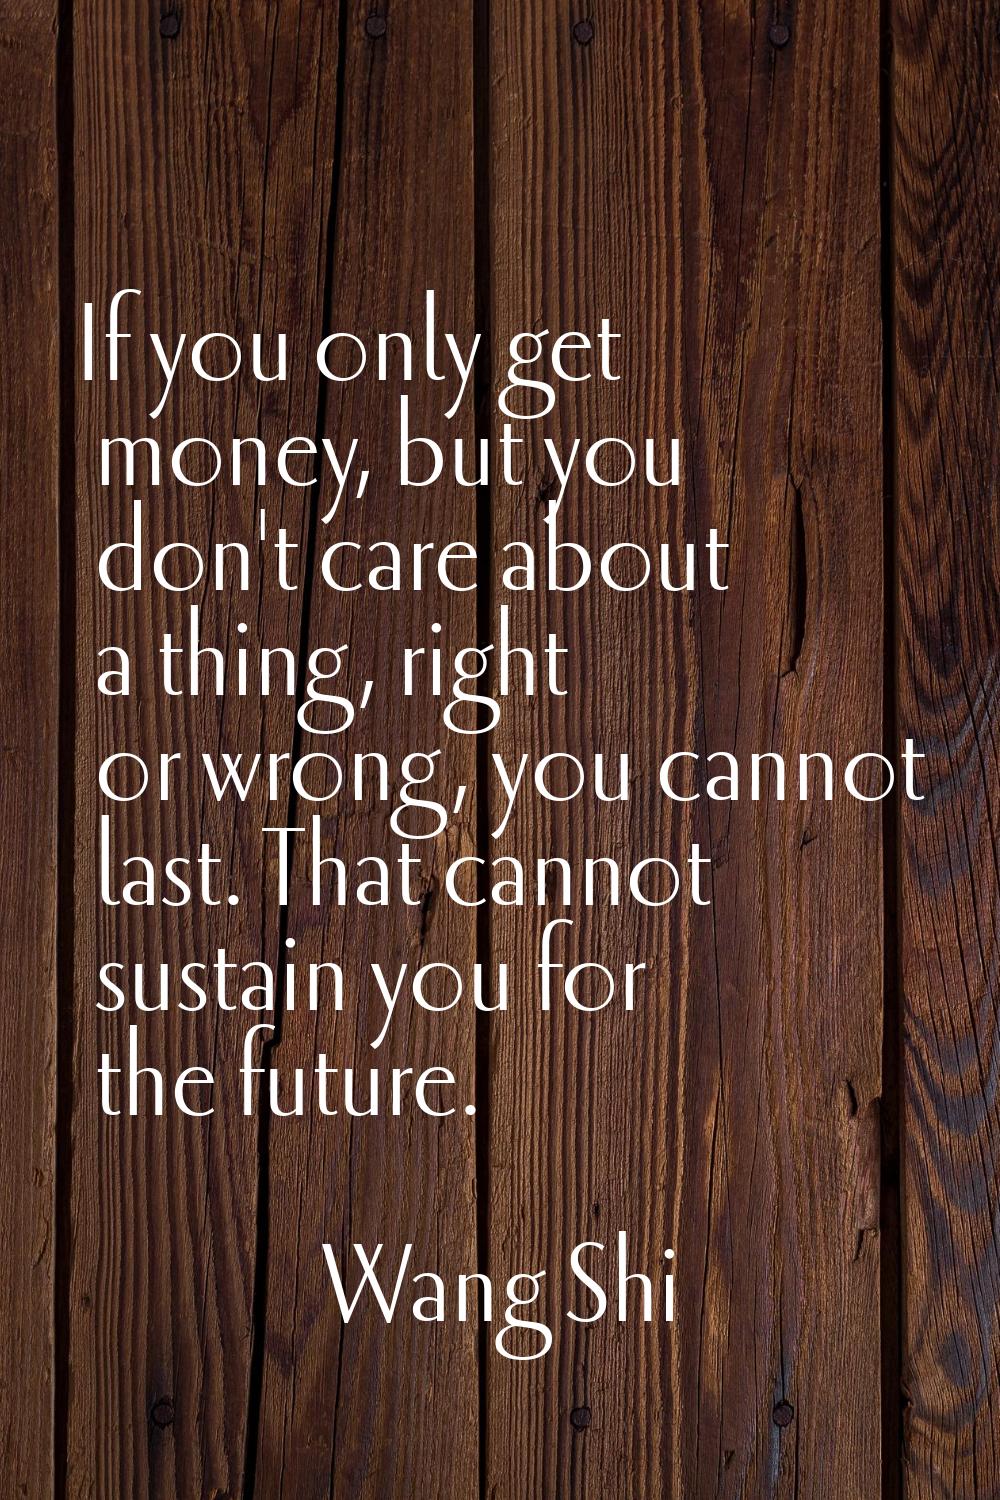 If you only get money, but you don't care about a thing, right or wrong, you cannot last. That cann